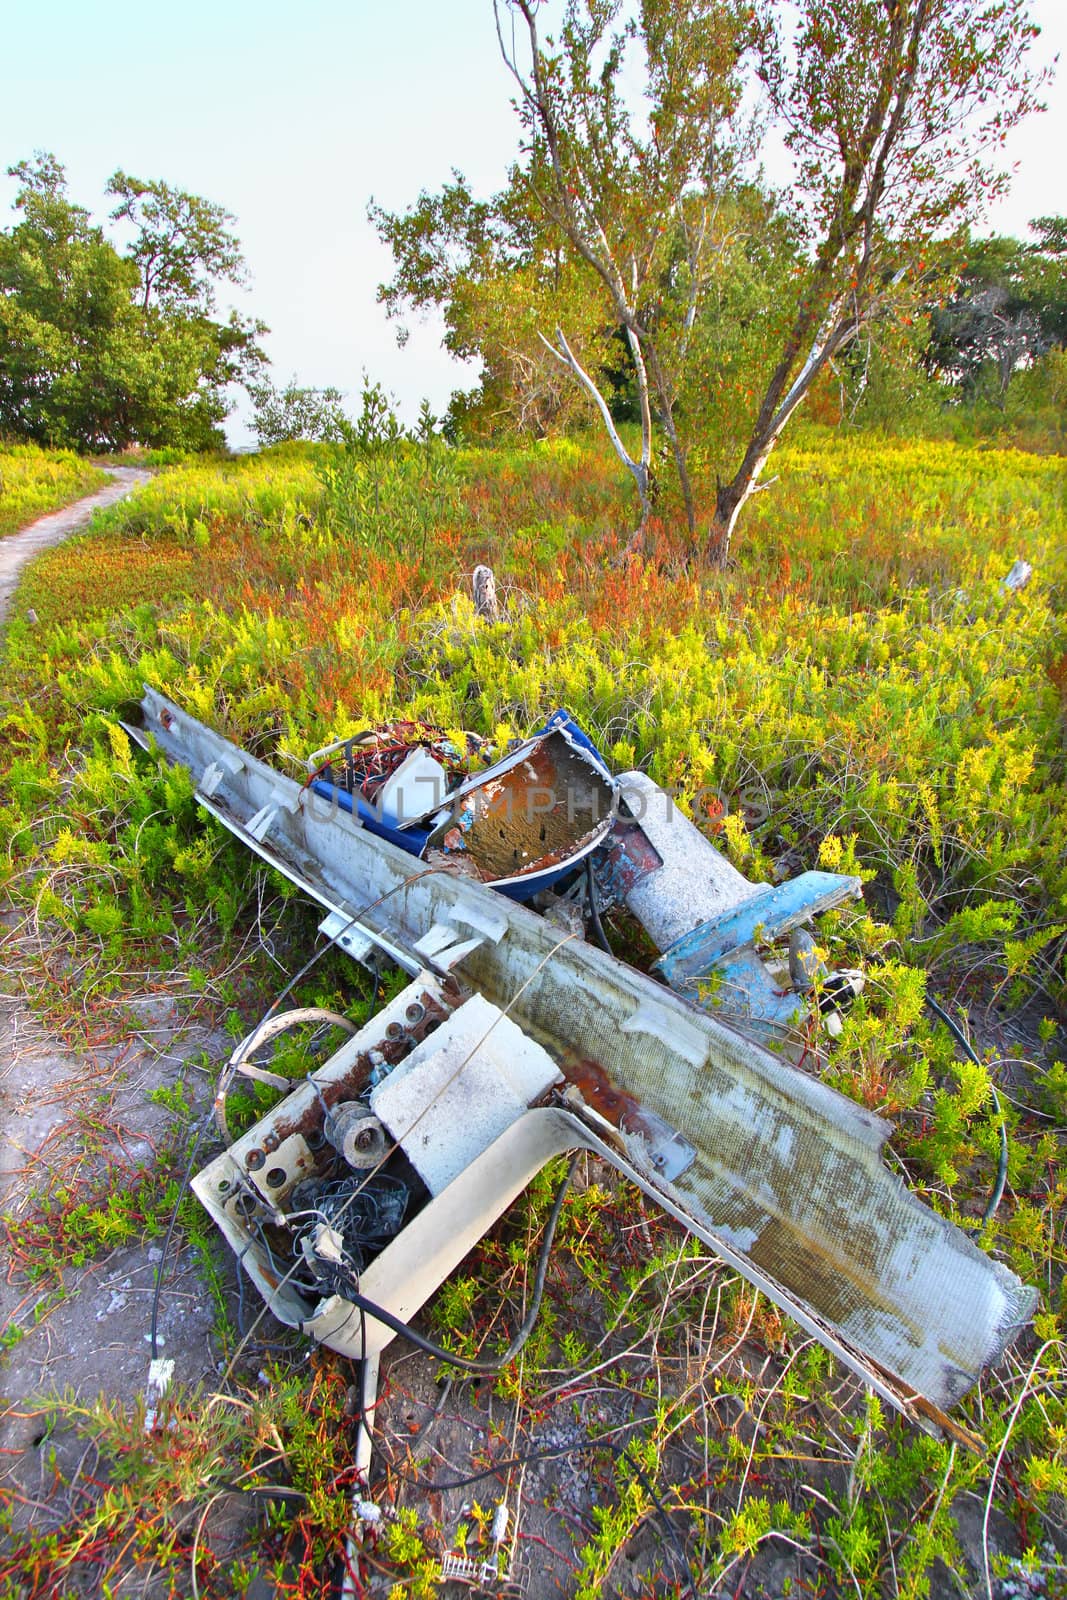 Wrecked Boat in the Everglades by Wirepec